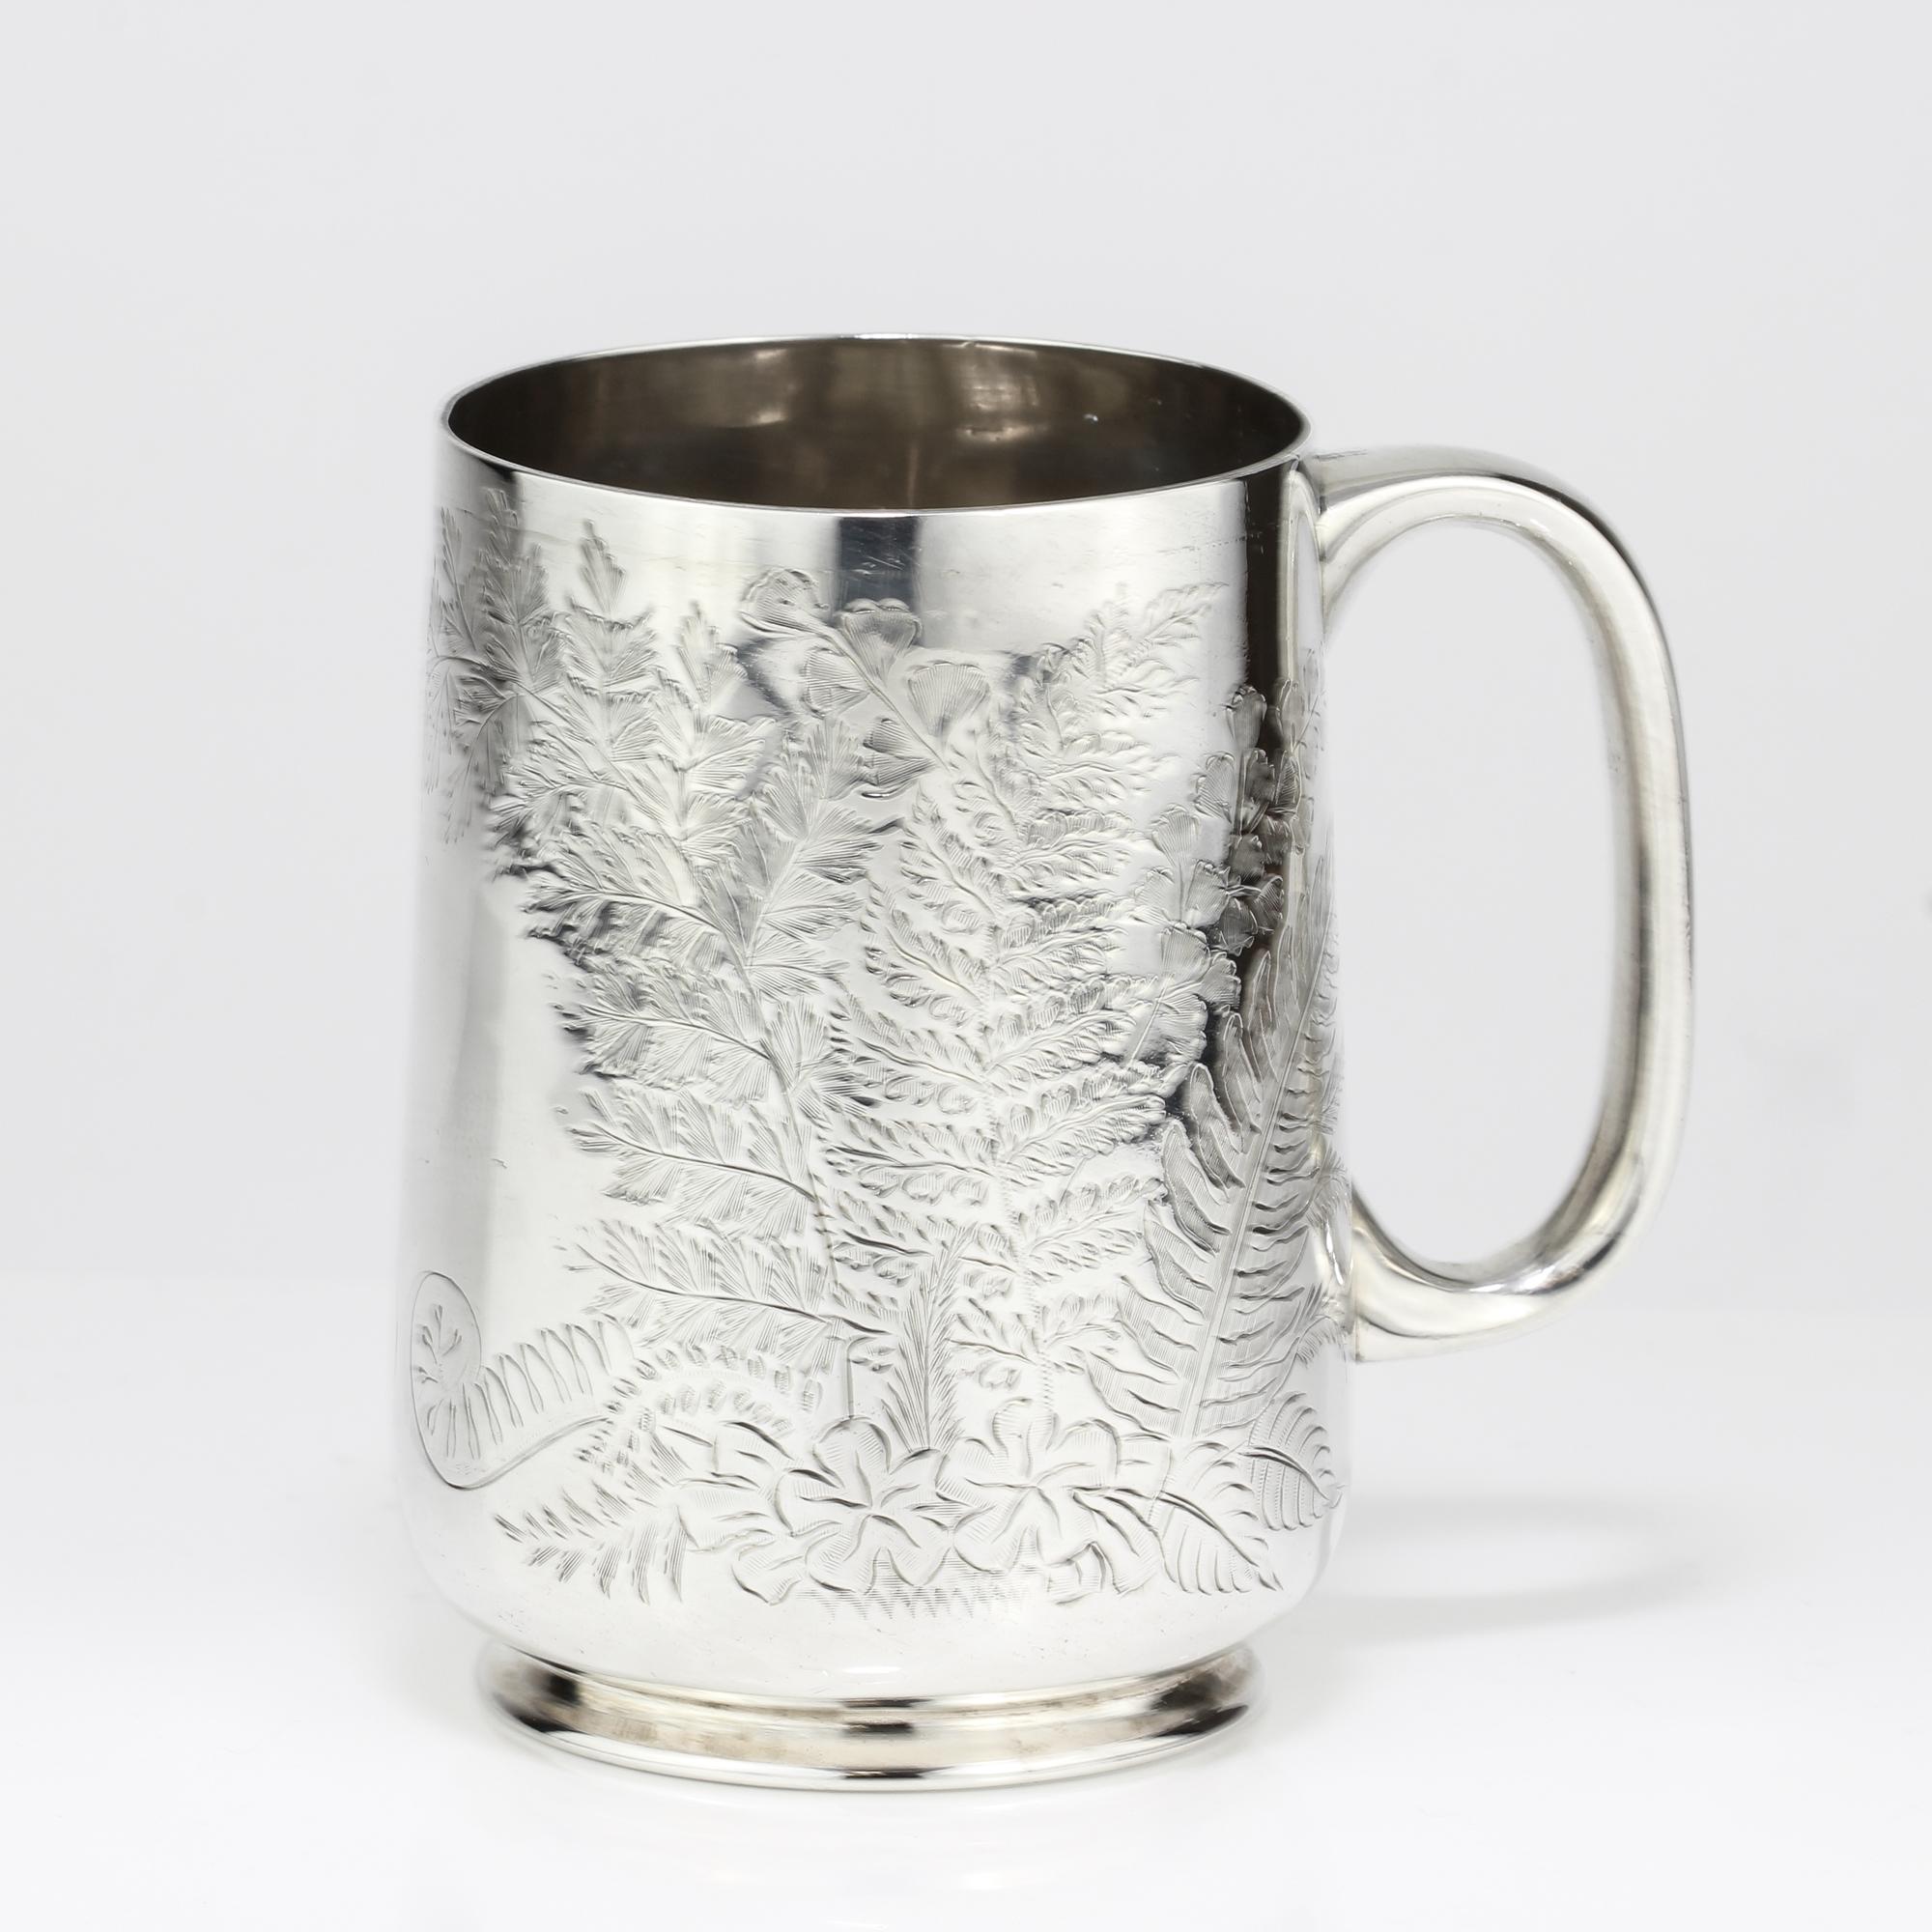 Antique Victorian small sterling silver mug with floral and leaf engravings
Maker: Thomas Bradbury & Sons
Made in: 1884
Fully hallmarked

Dimensions:
Size: 8.5 x 6.5 x 9 cm
Weight: 123 grams

Condition: Minor wear and tear from general